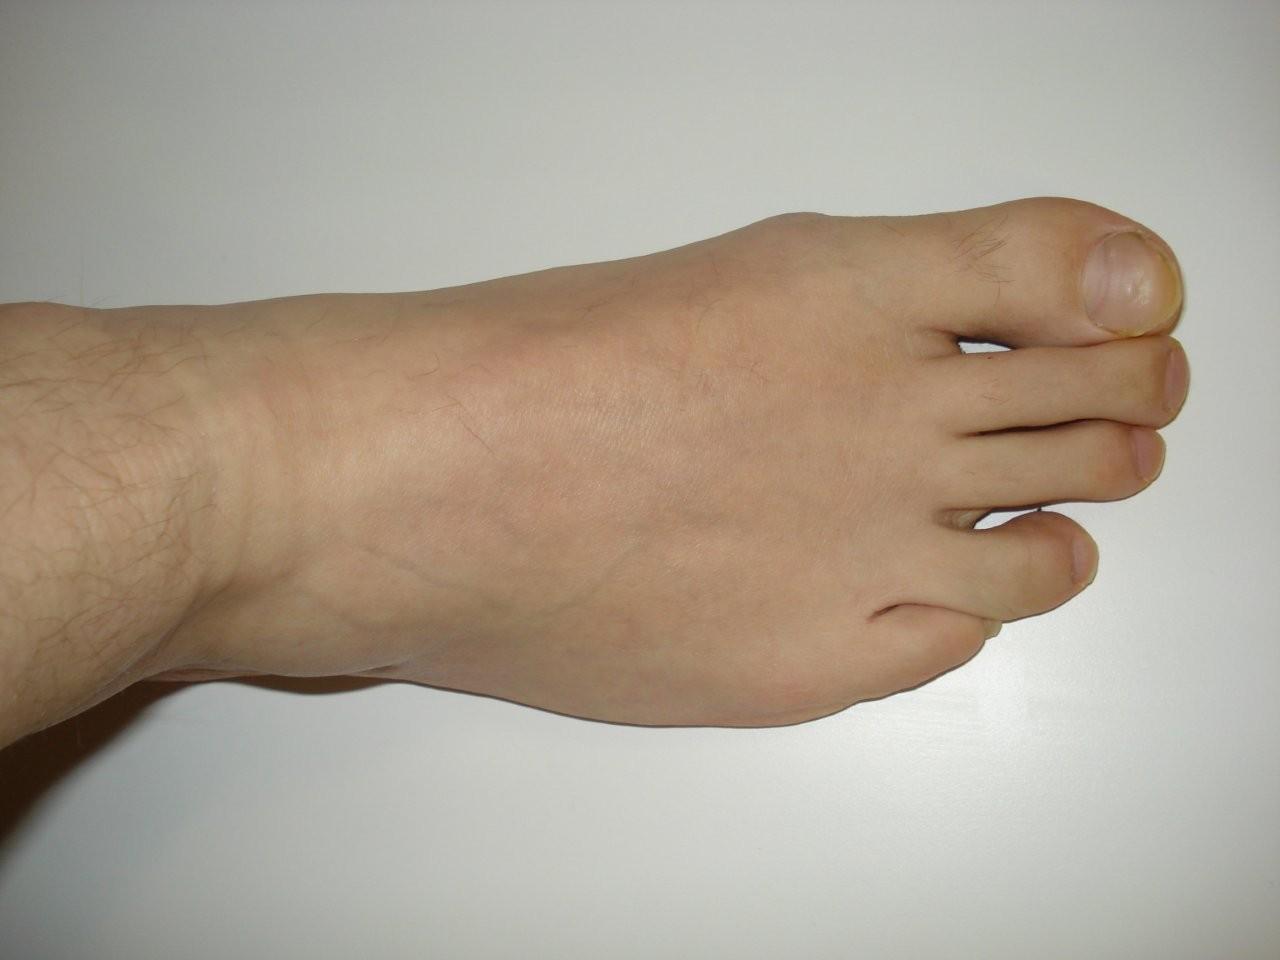 File:Right foot.jpg - Wikimedia Commons